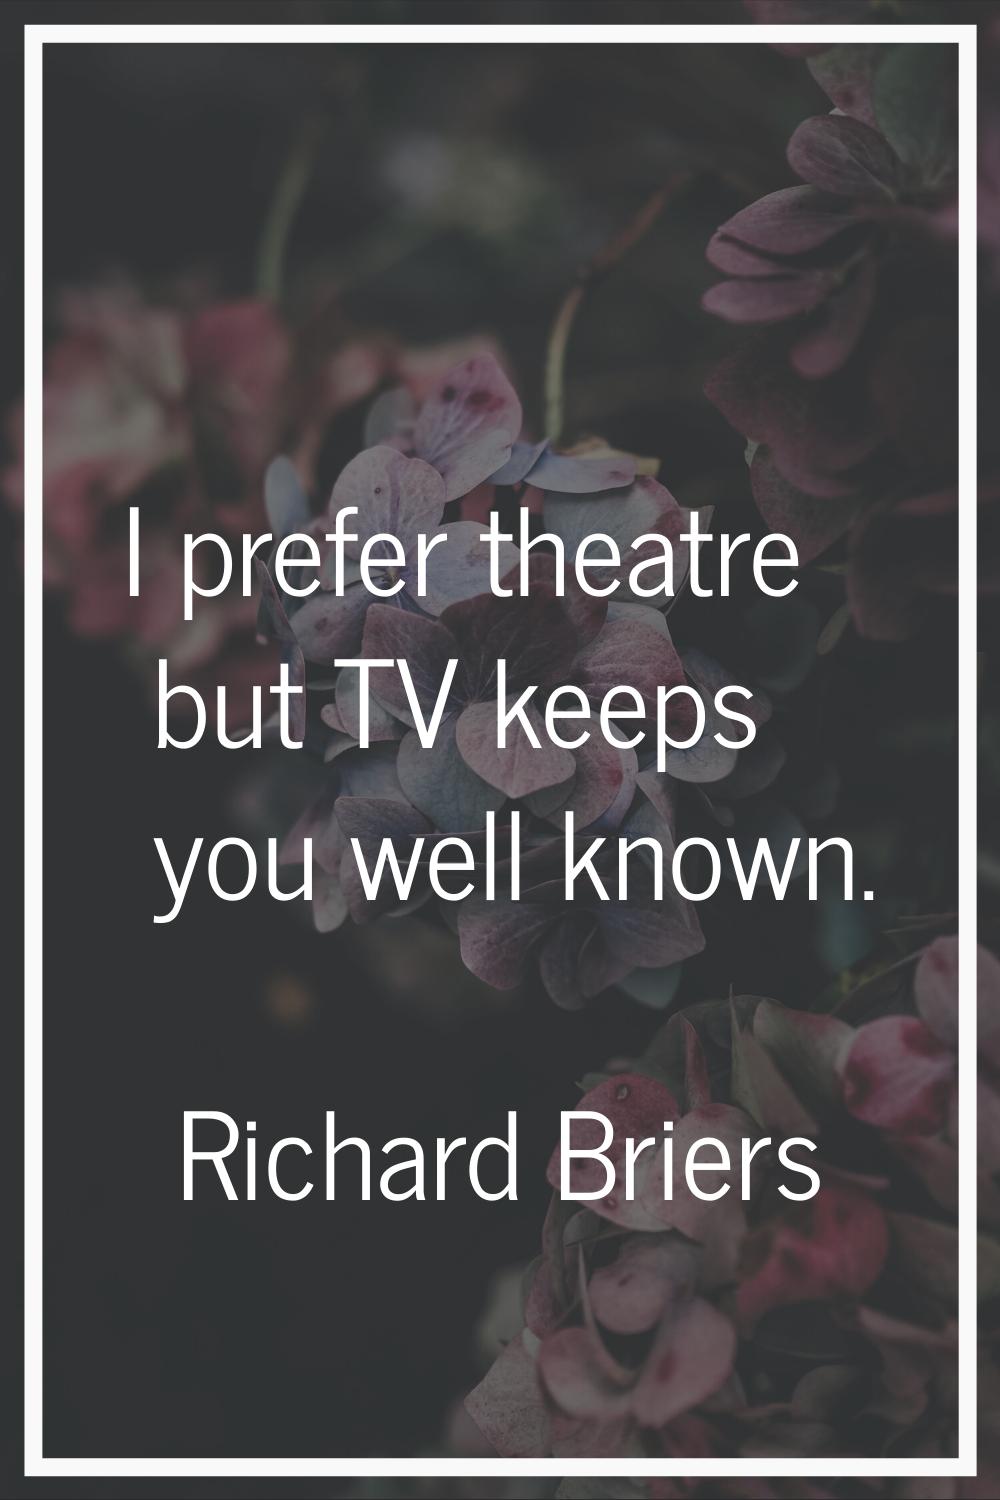 I prefer theatre but TV keeps you well known.